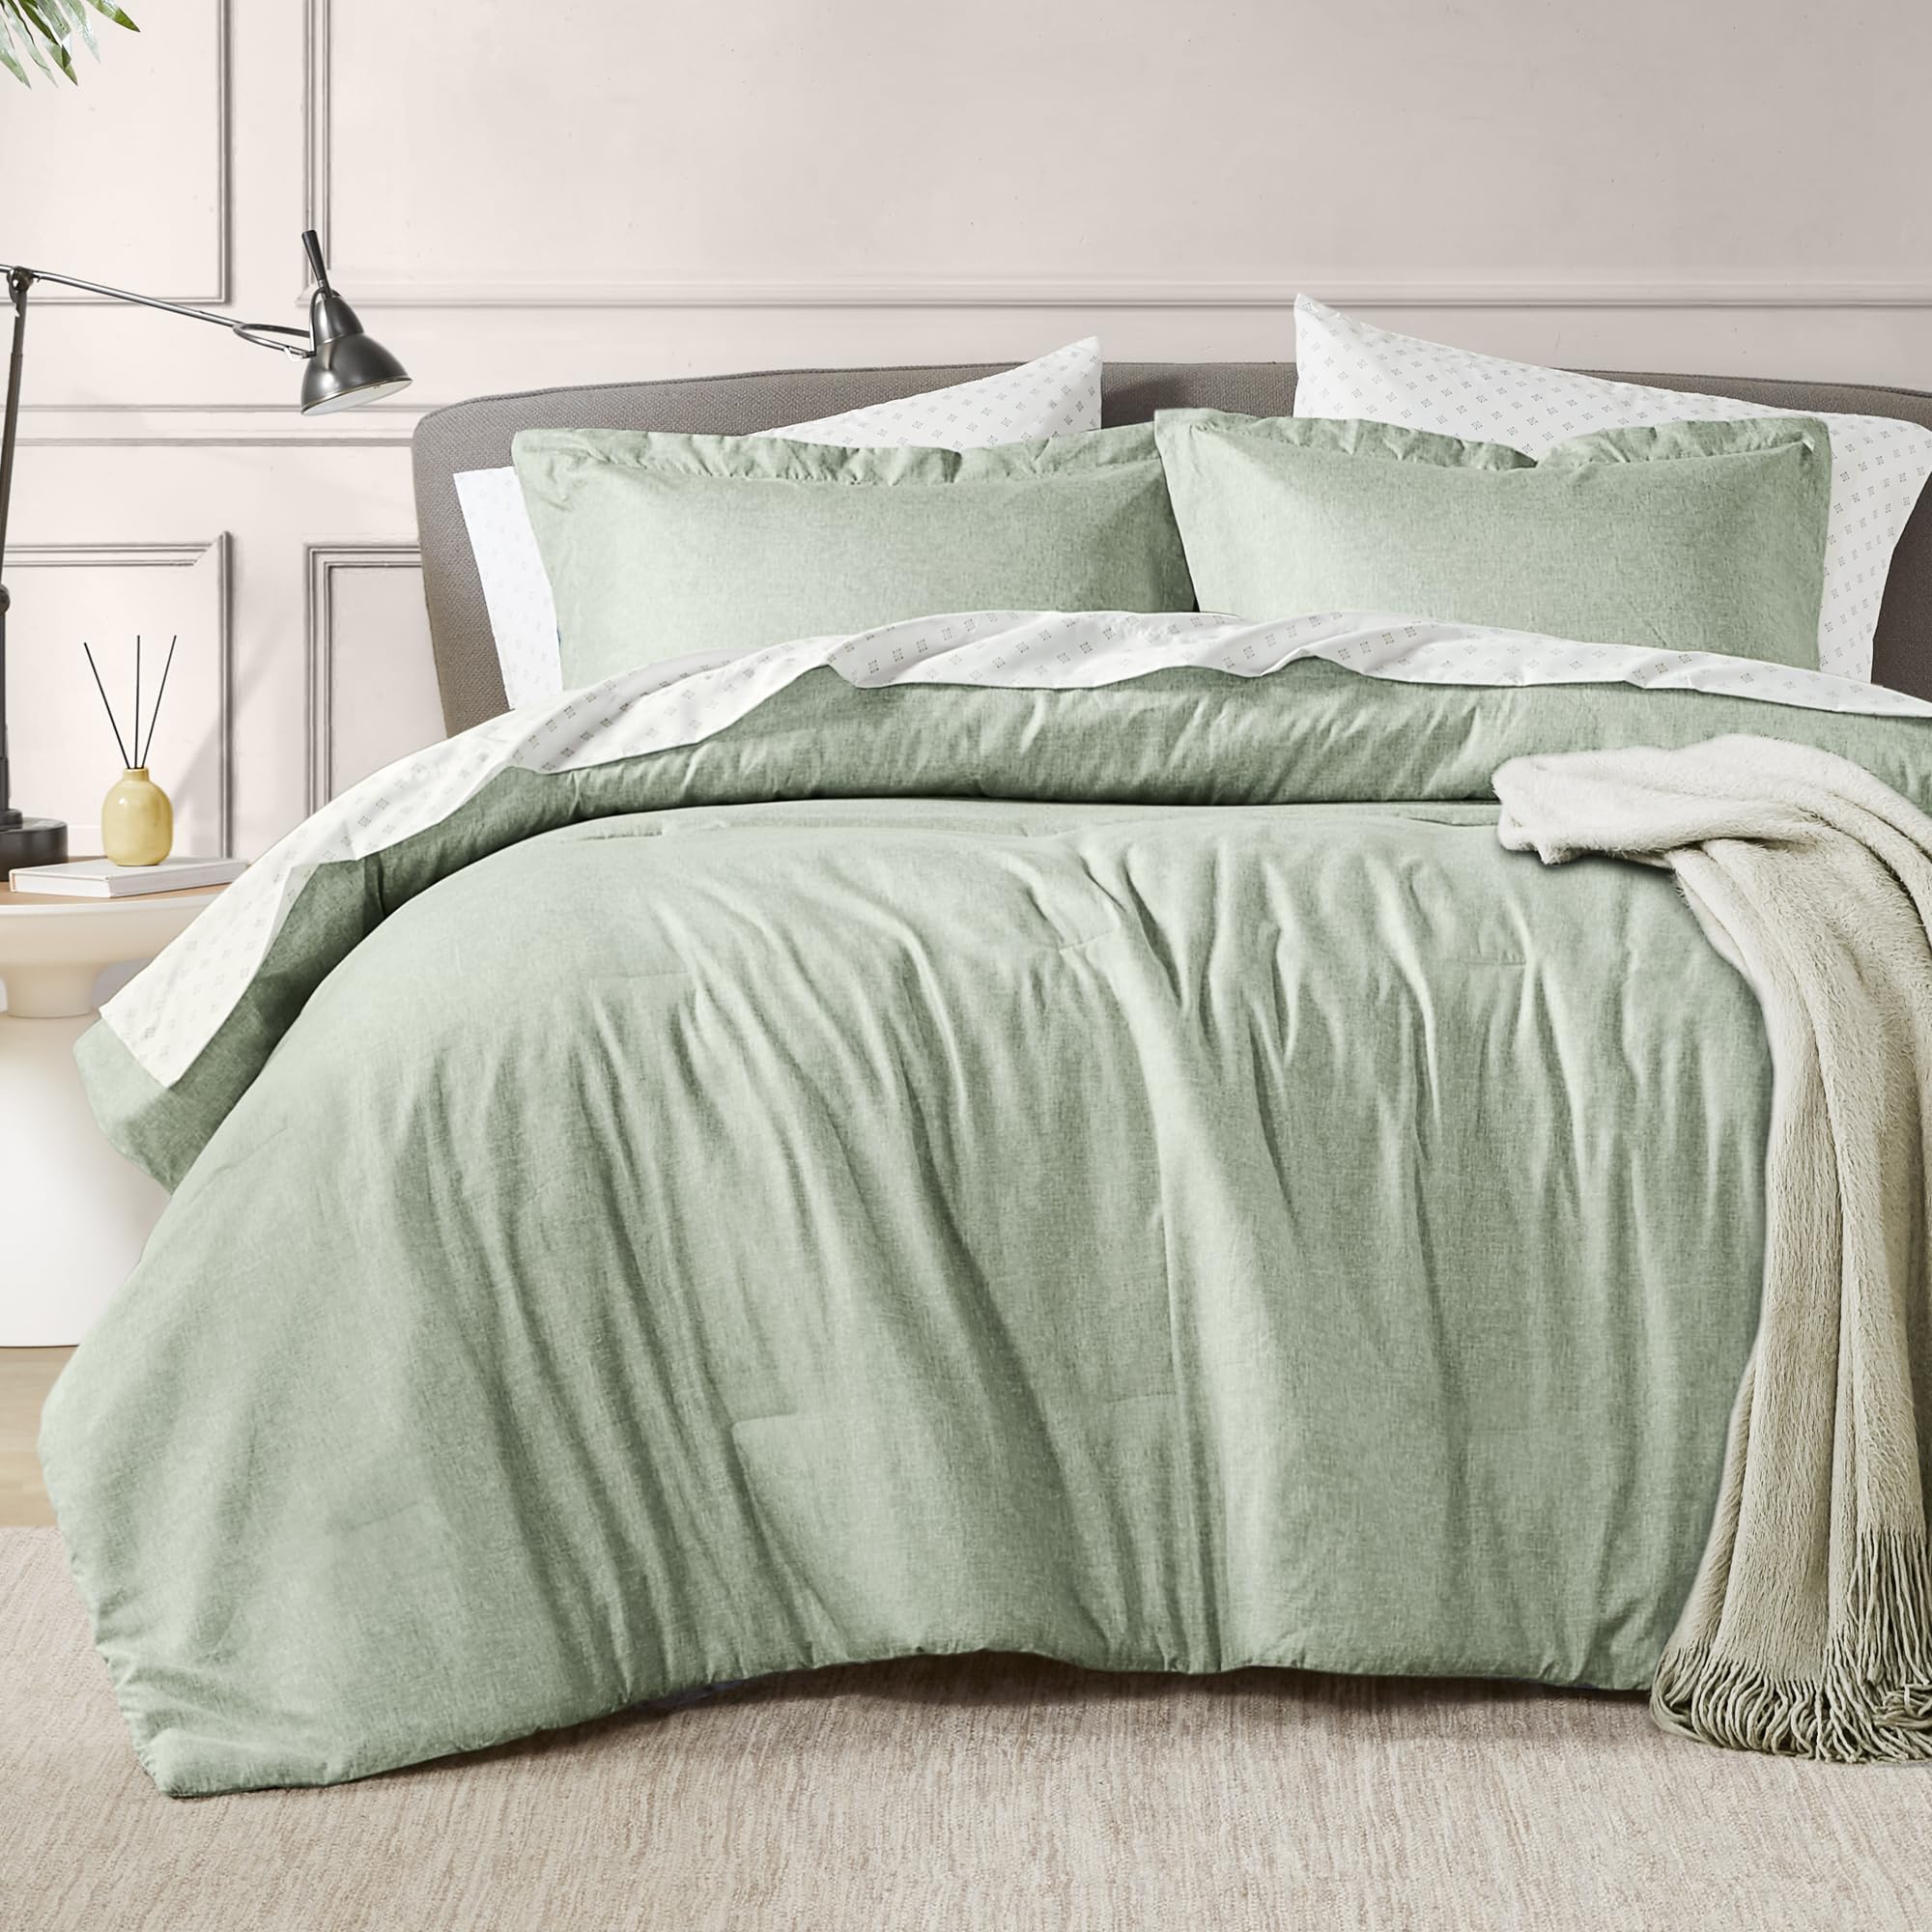 7 Pieces Bed in a Bag, Sage Green Comforter Set with Sheets, Queen Size, Chambray Print, All Season Luxury Microfiber Bedset, Complete 7-Piece Including Comforter, Sheets, Pillowcases & Sham